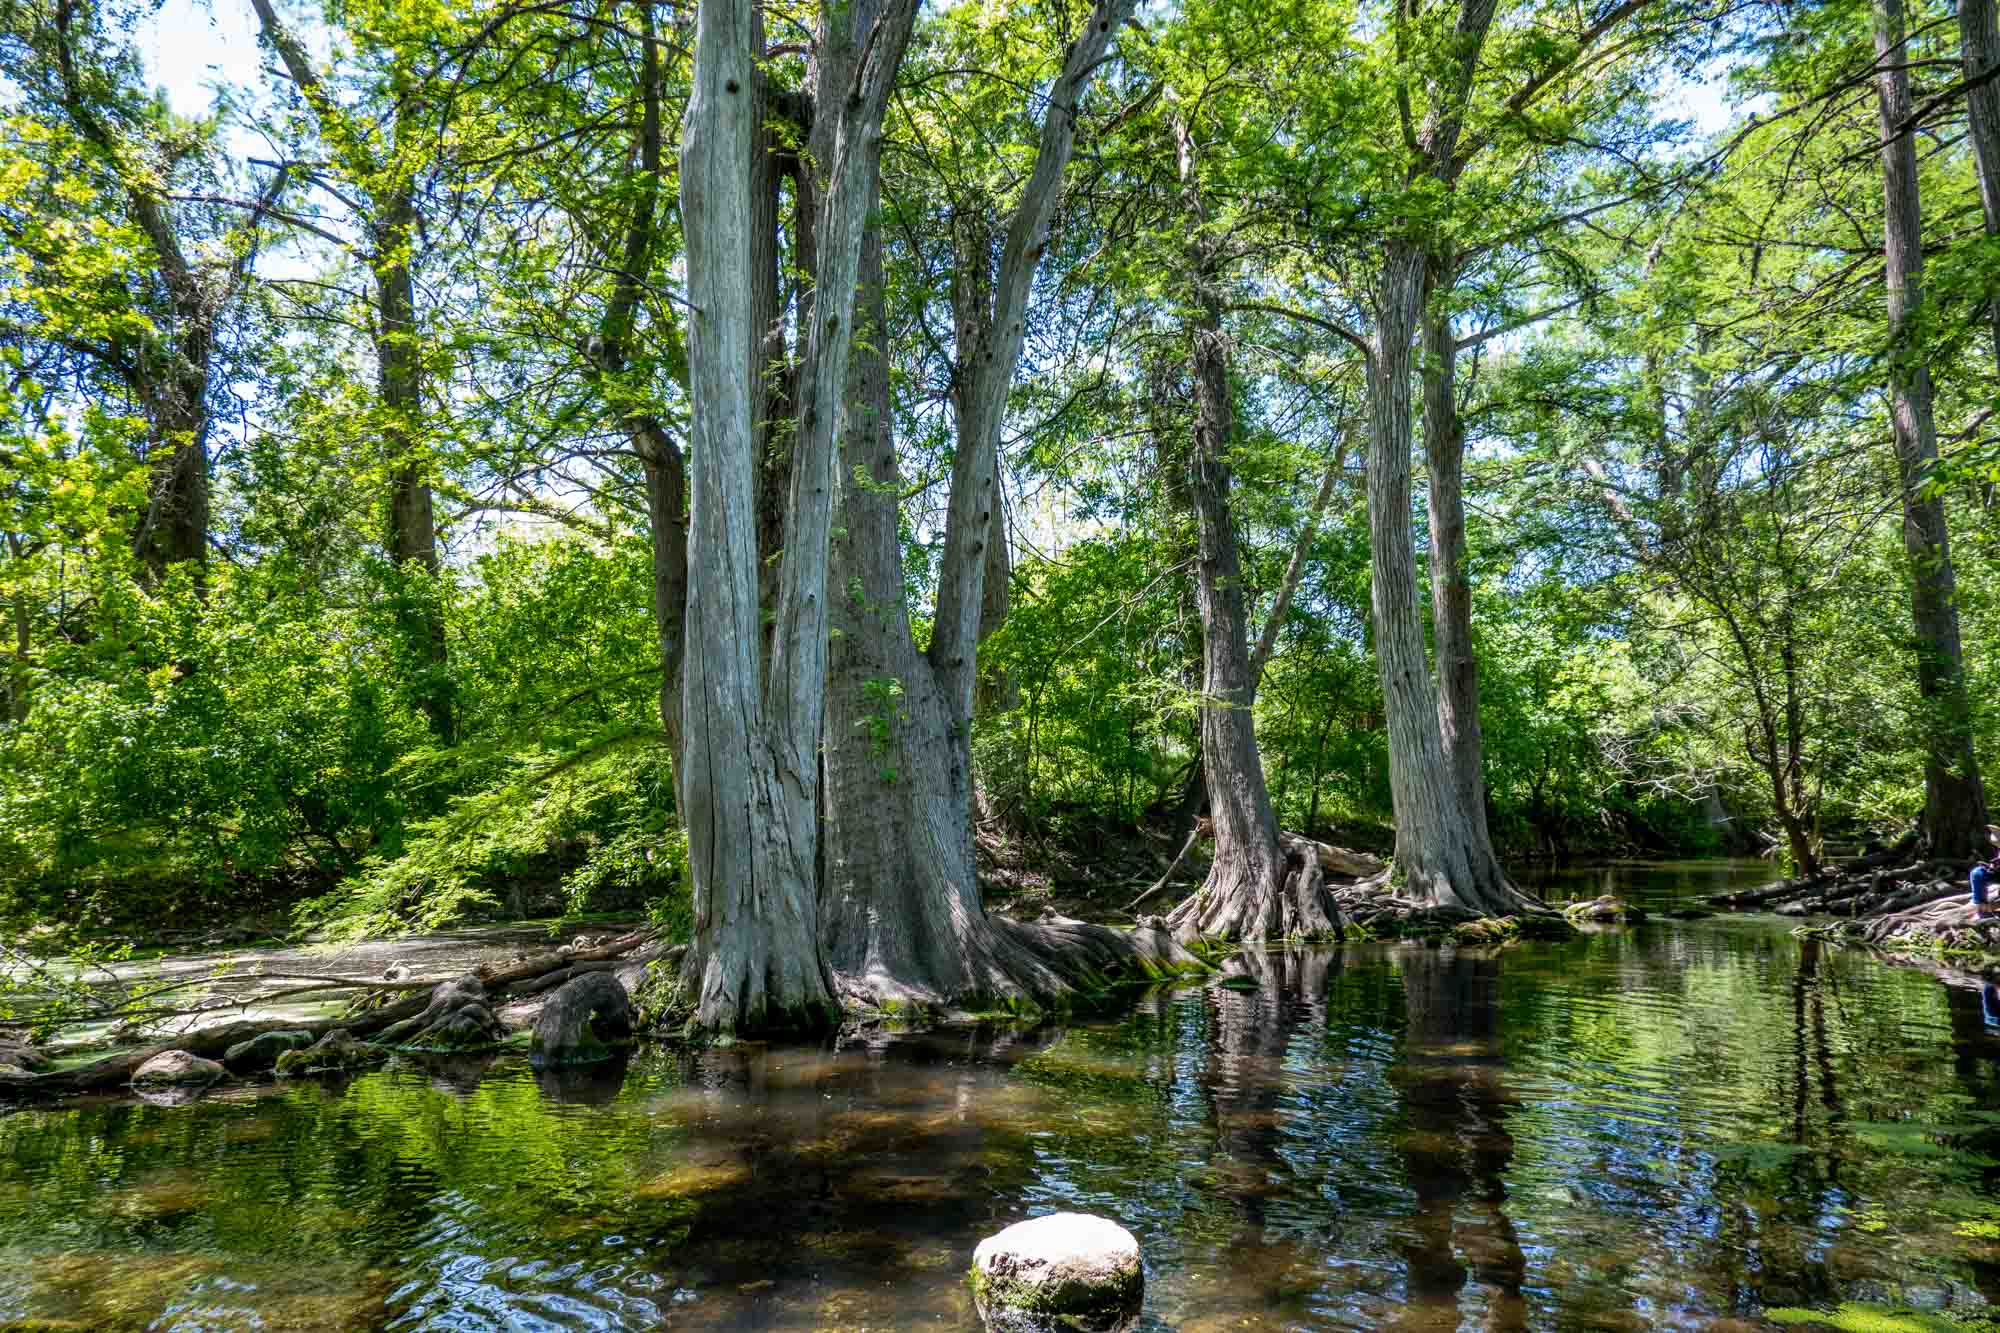 Creek lined with tall cypress trees